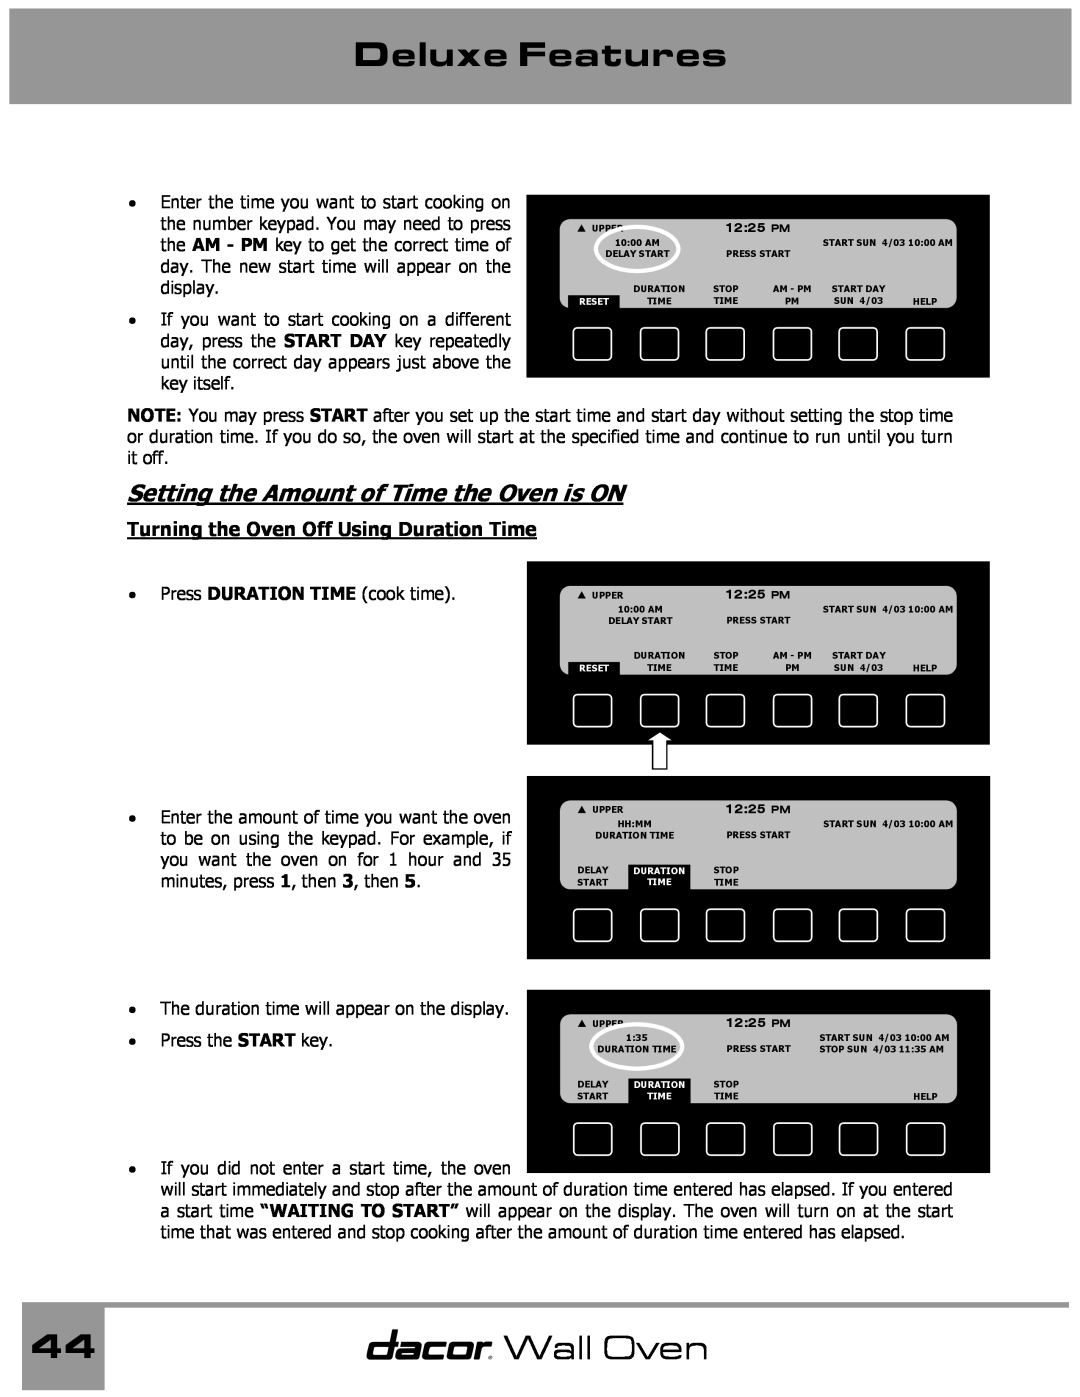 Dacor Wall Oven manual Setting the Amount of Time the Oven is ON, Turning the Oven Off Using Duration Time, Deluxe Features 